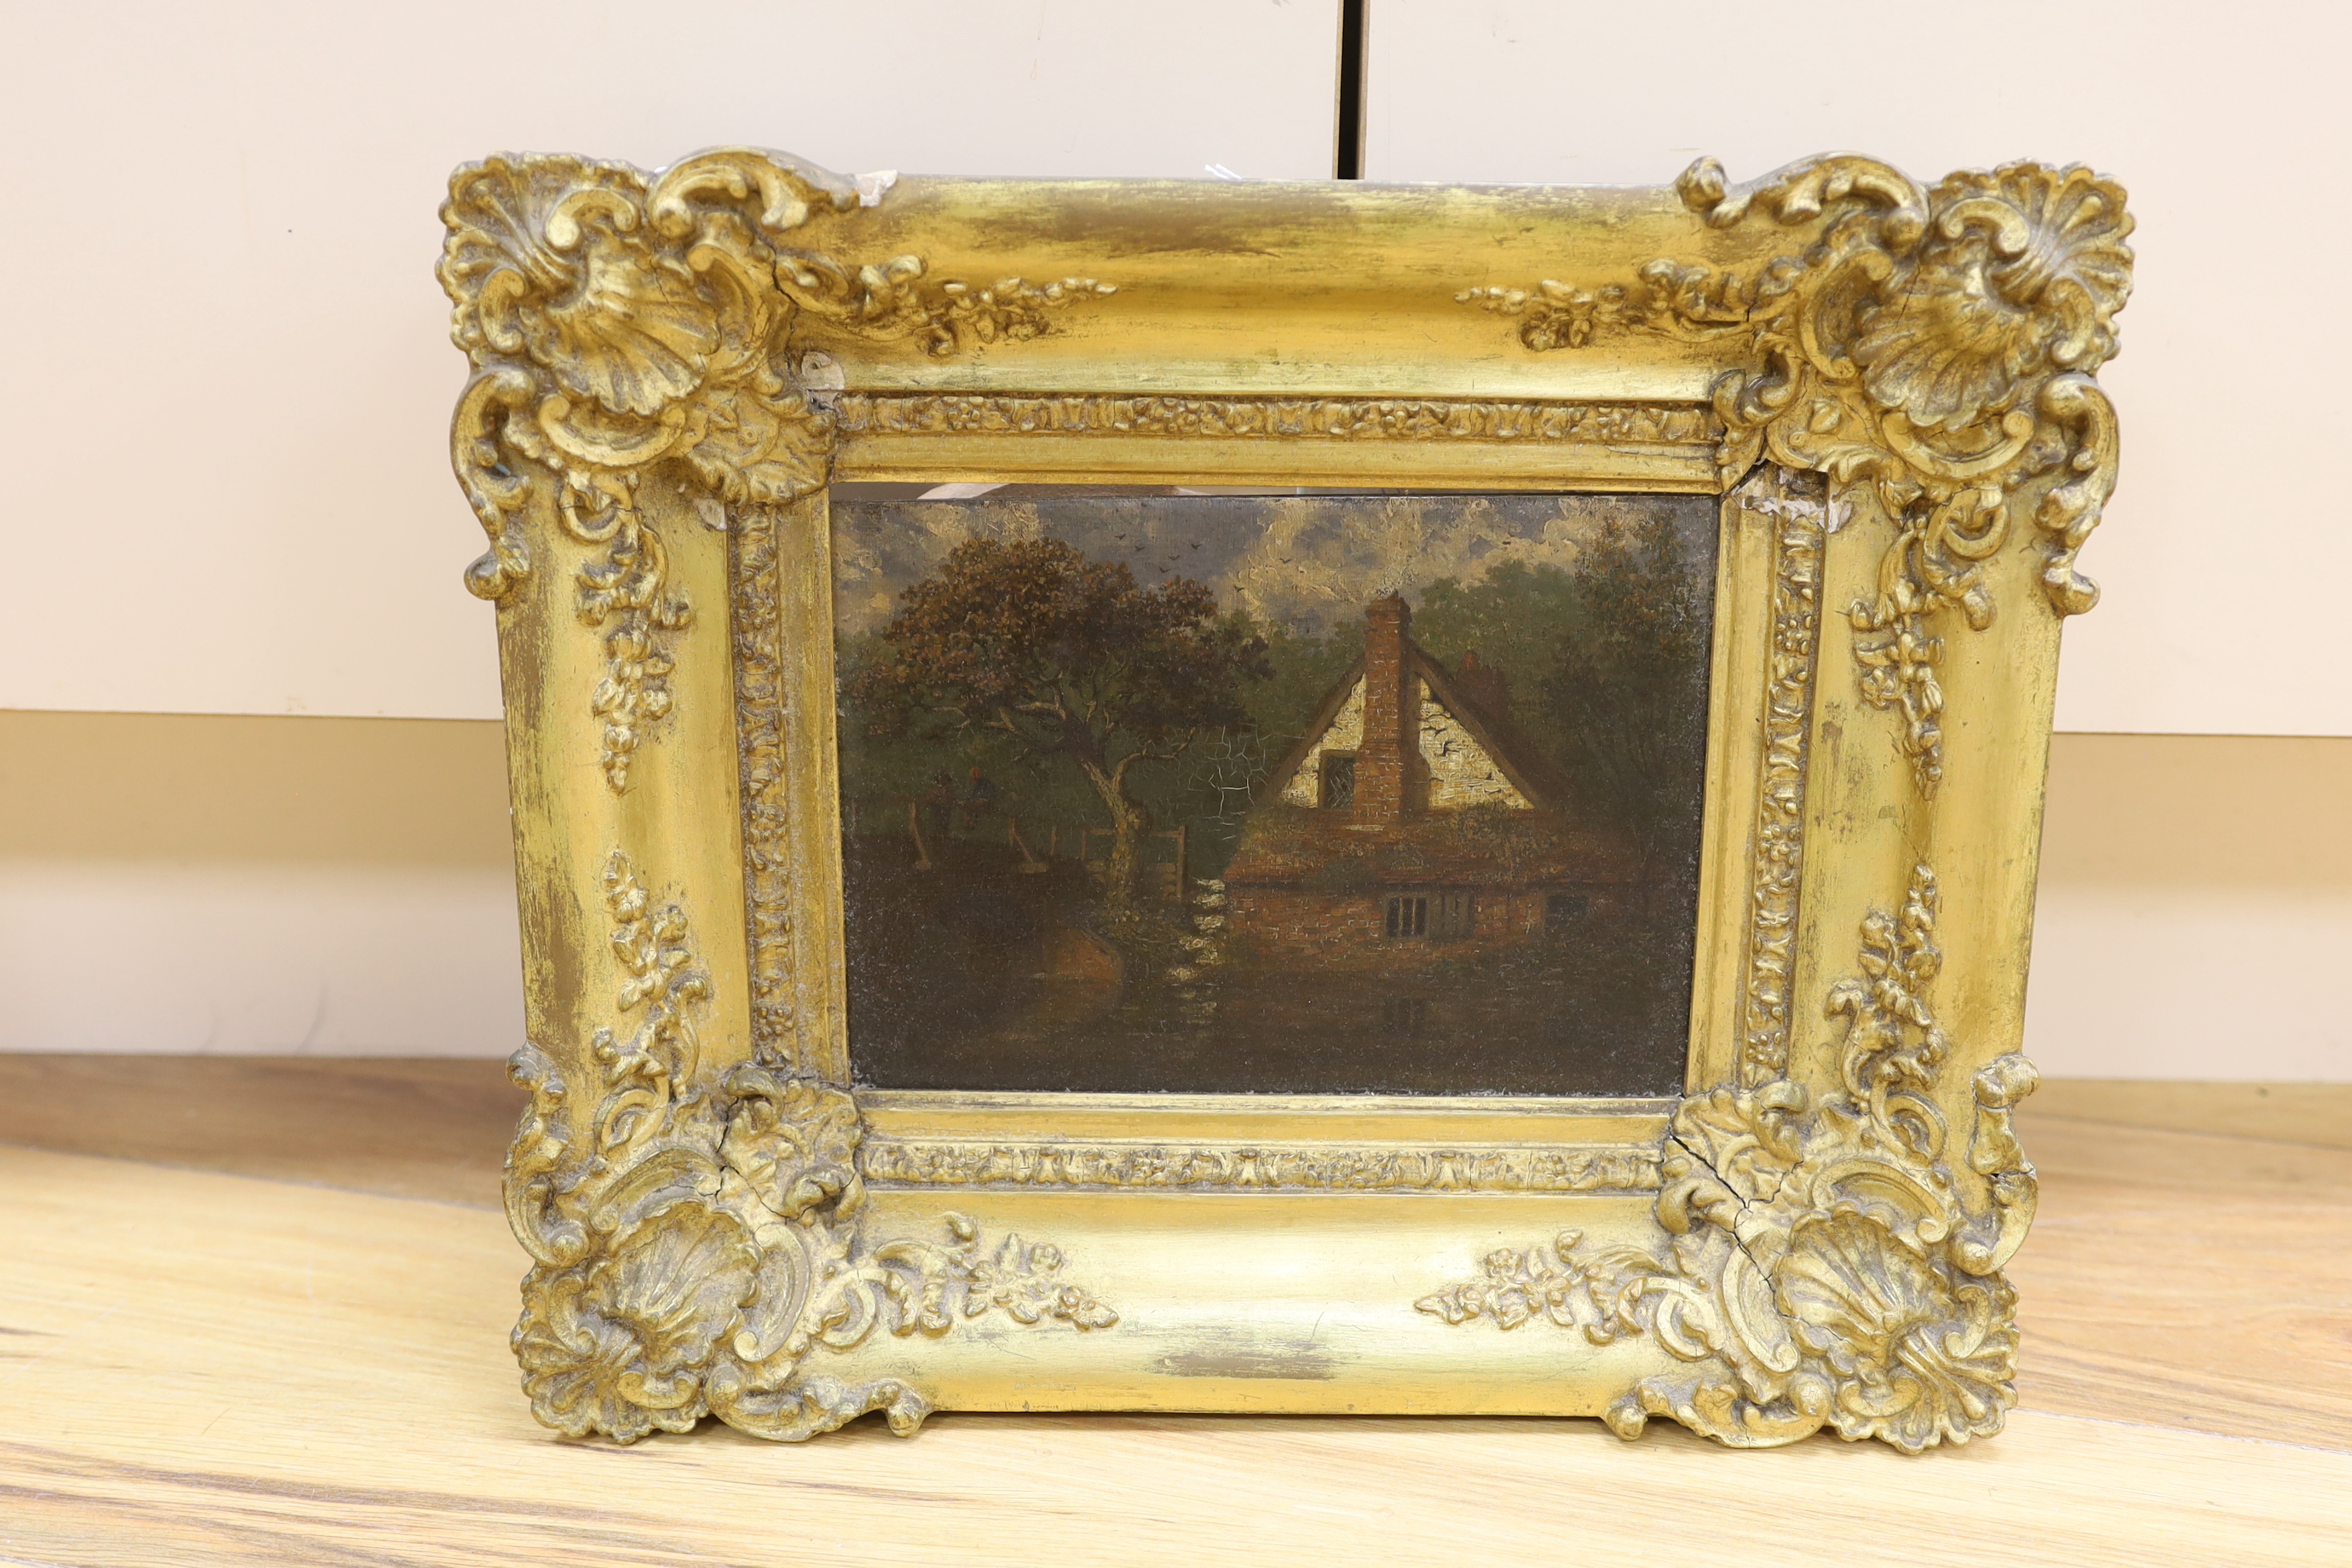 Early 19th century, oil on panel, Rural landscape with cottage, 15 x 20cm, ornate gilt framed